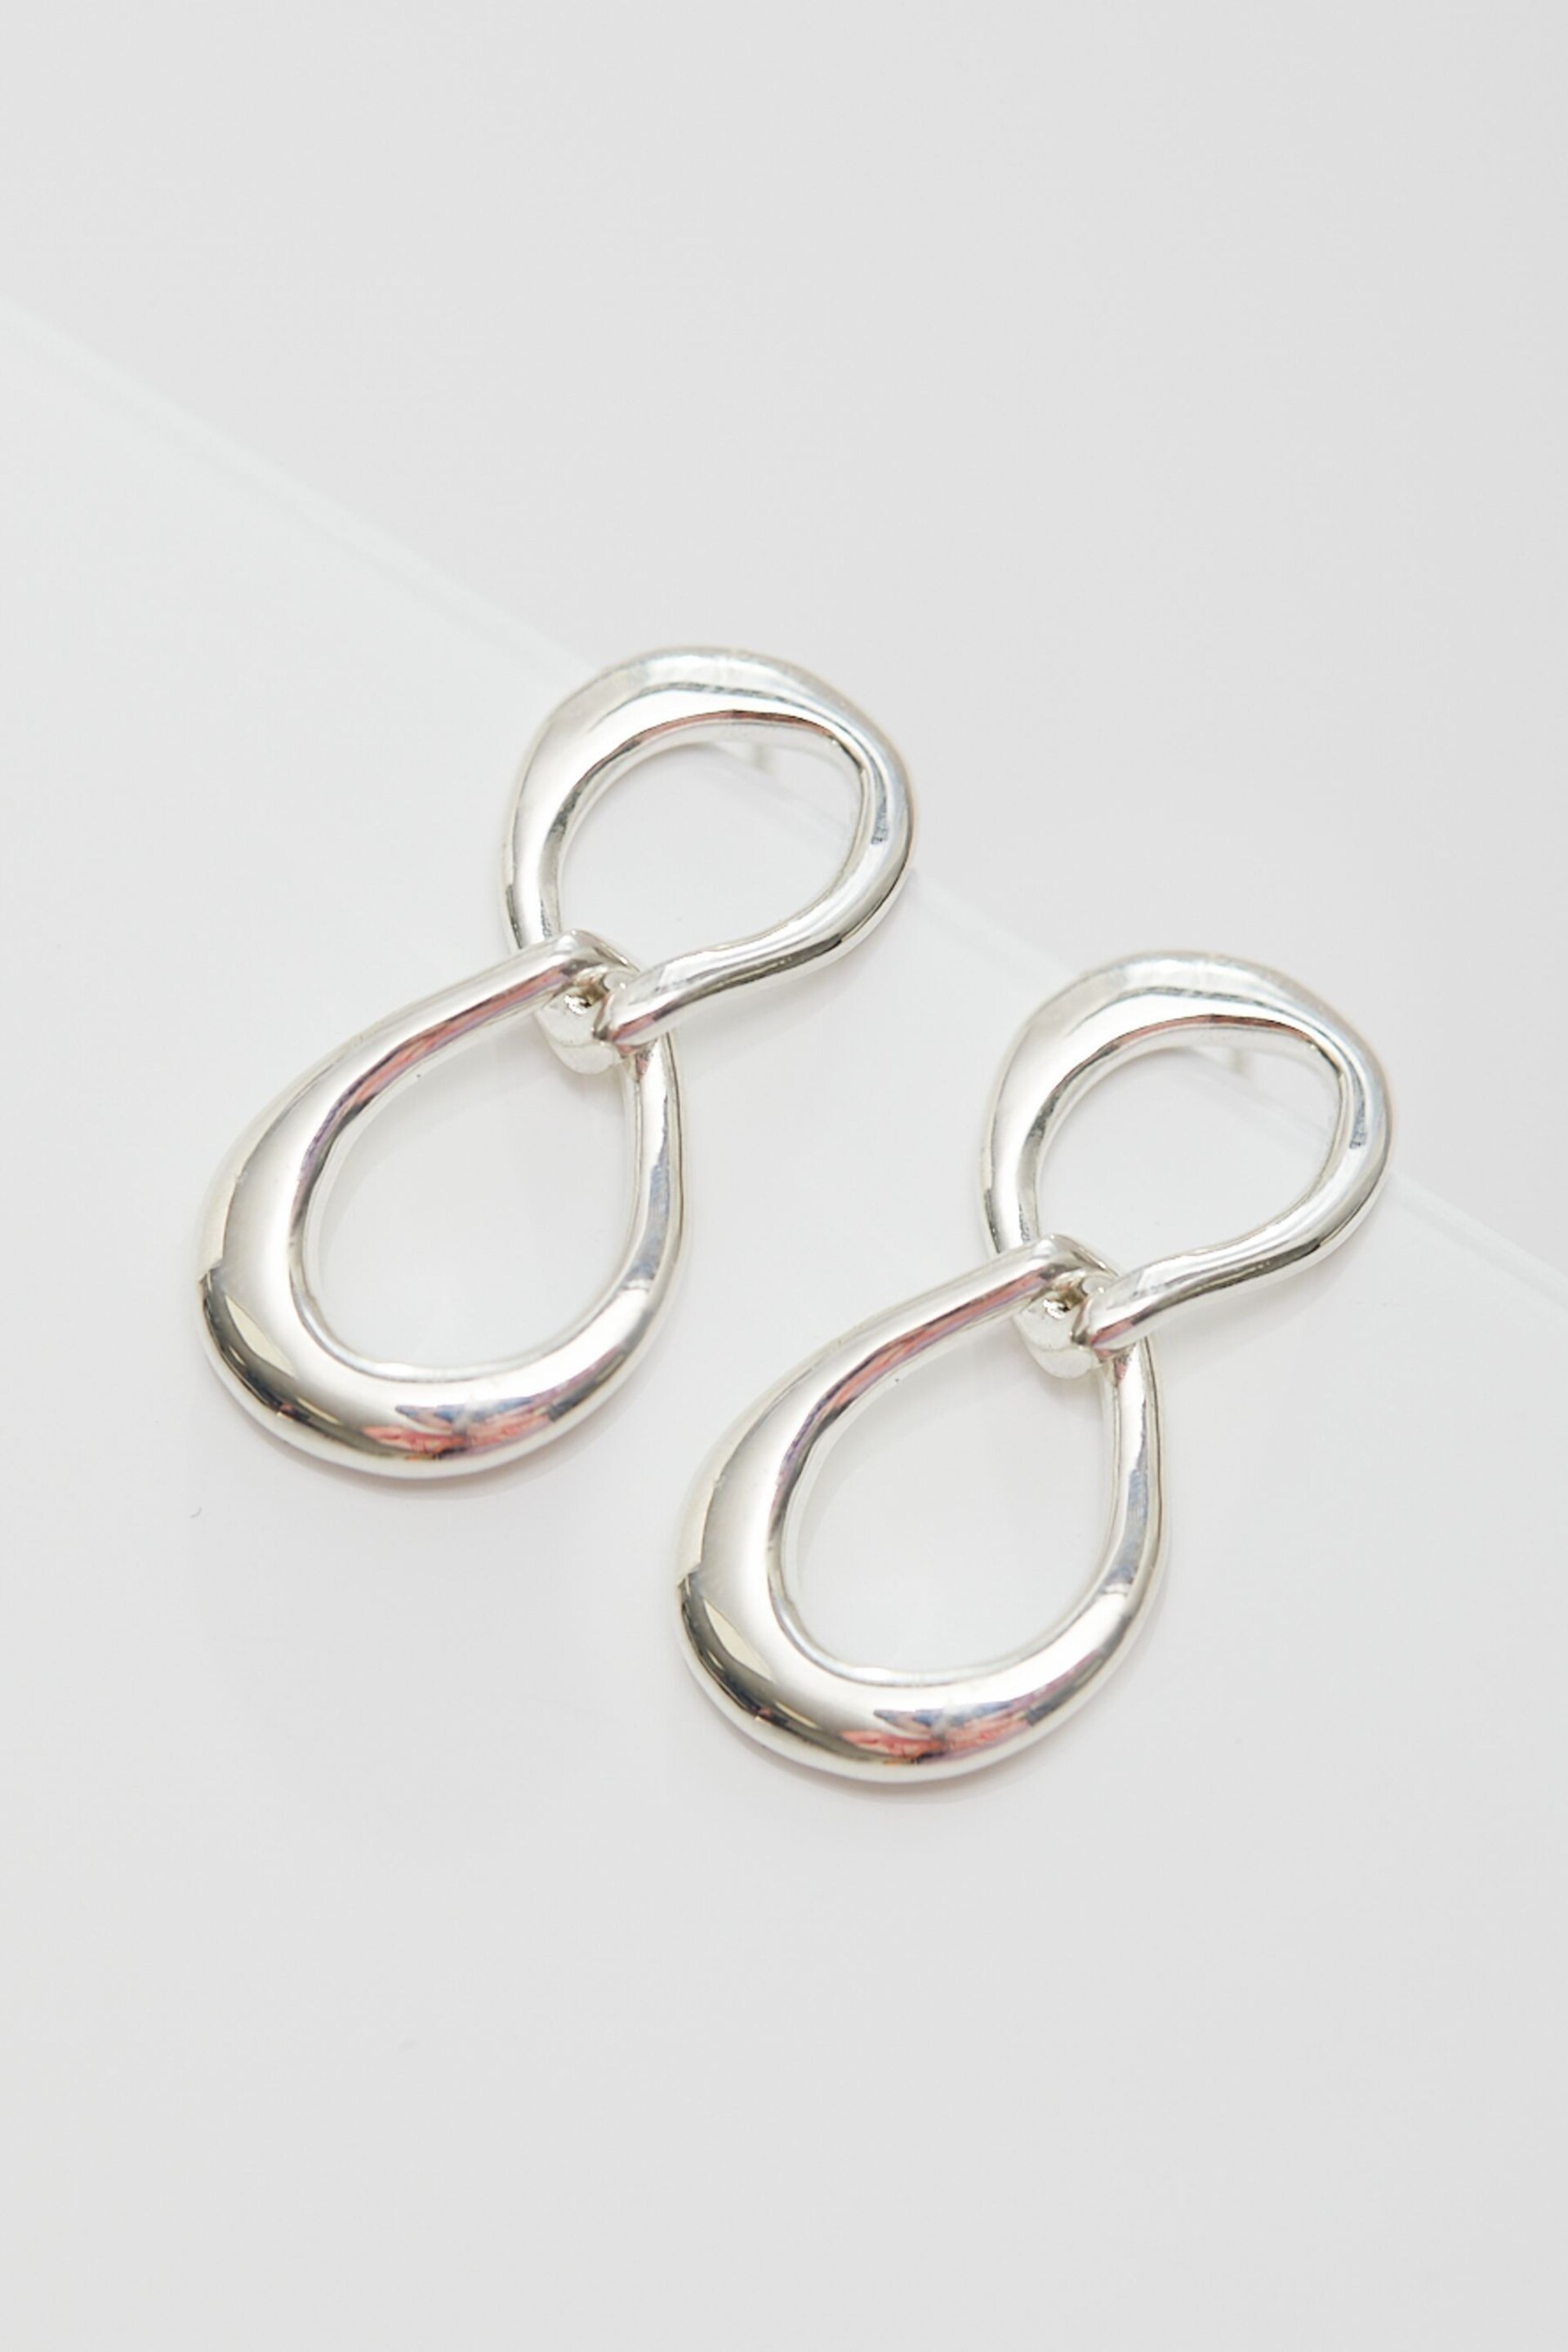 Simply Silver Silver Tone Polished Oval Link Drop Earrings - Image 3 of 3